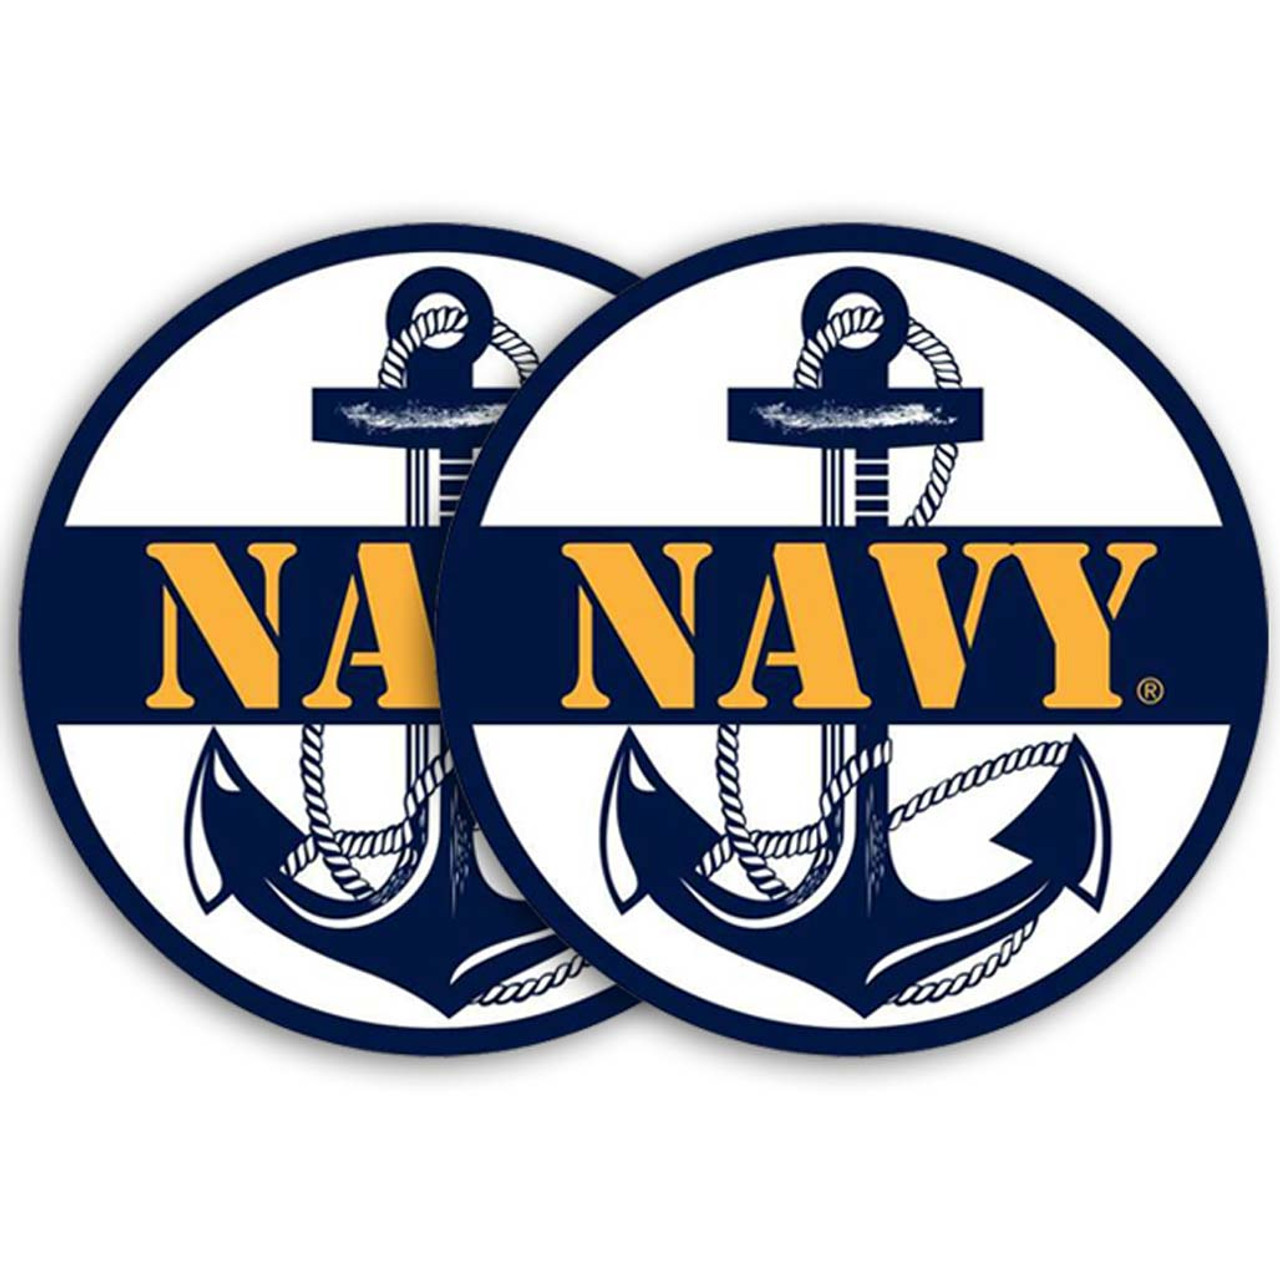 Navy Decal with Anchor Graphic Quantity of (2) - shows illustration of 2 navy decals